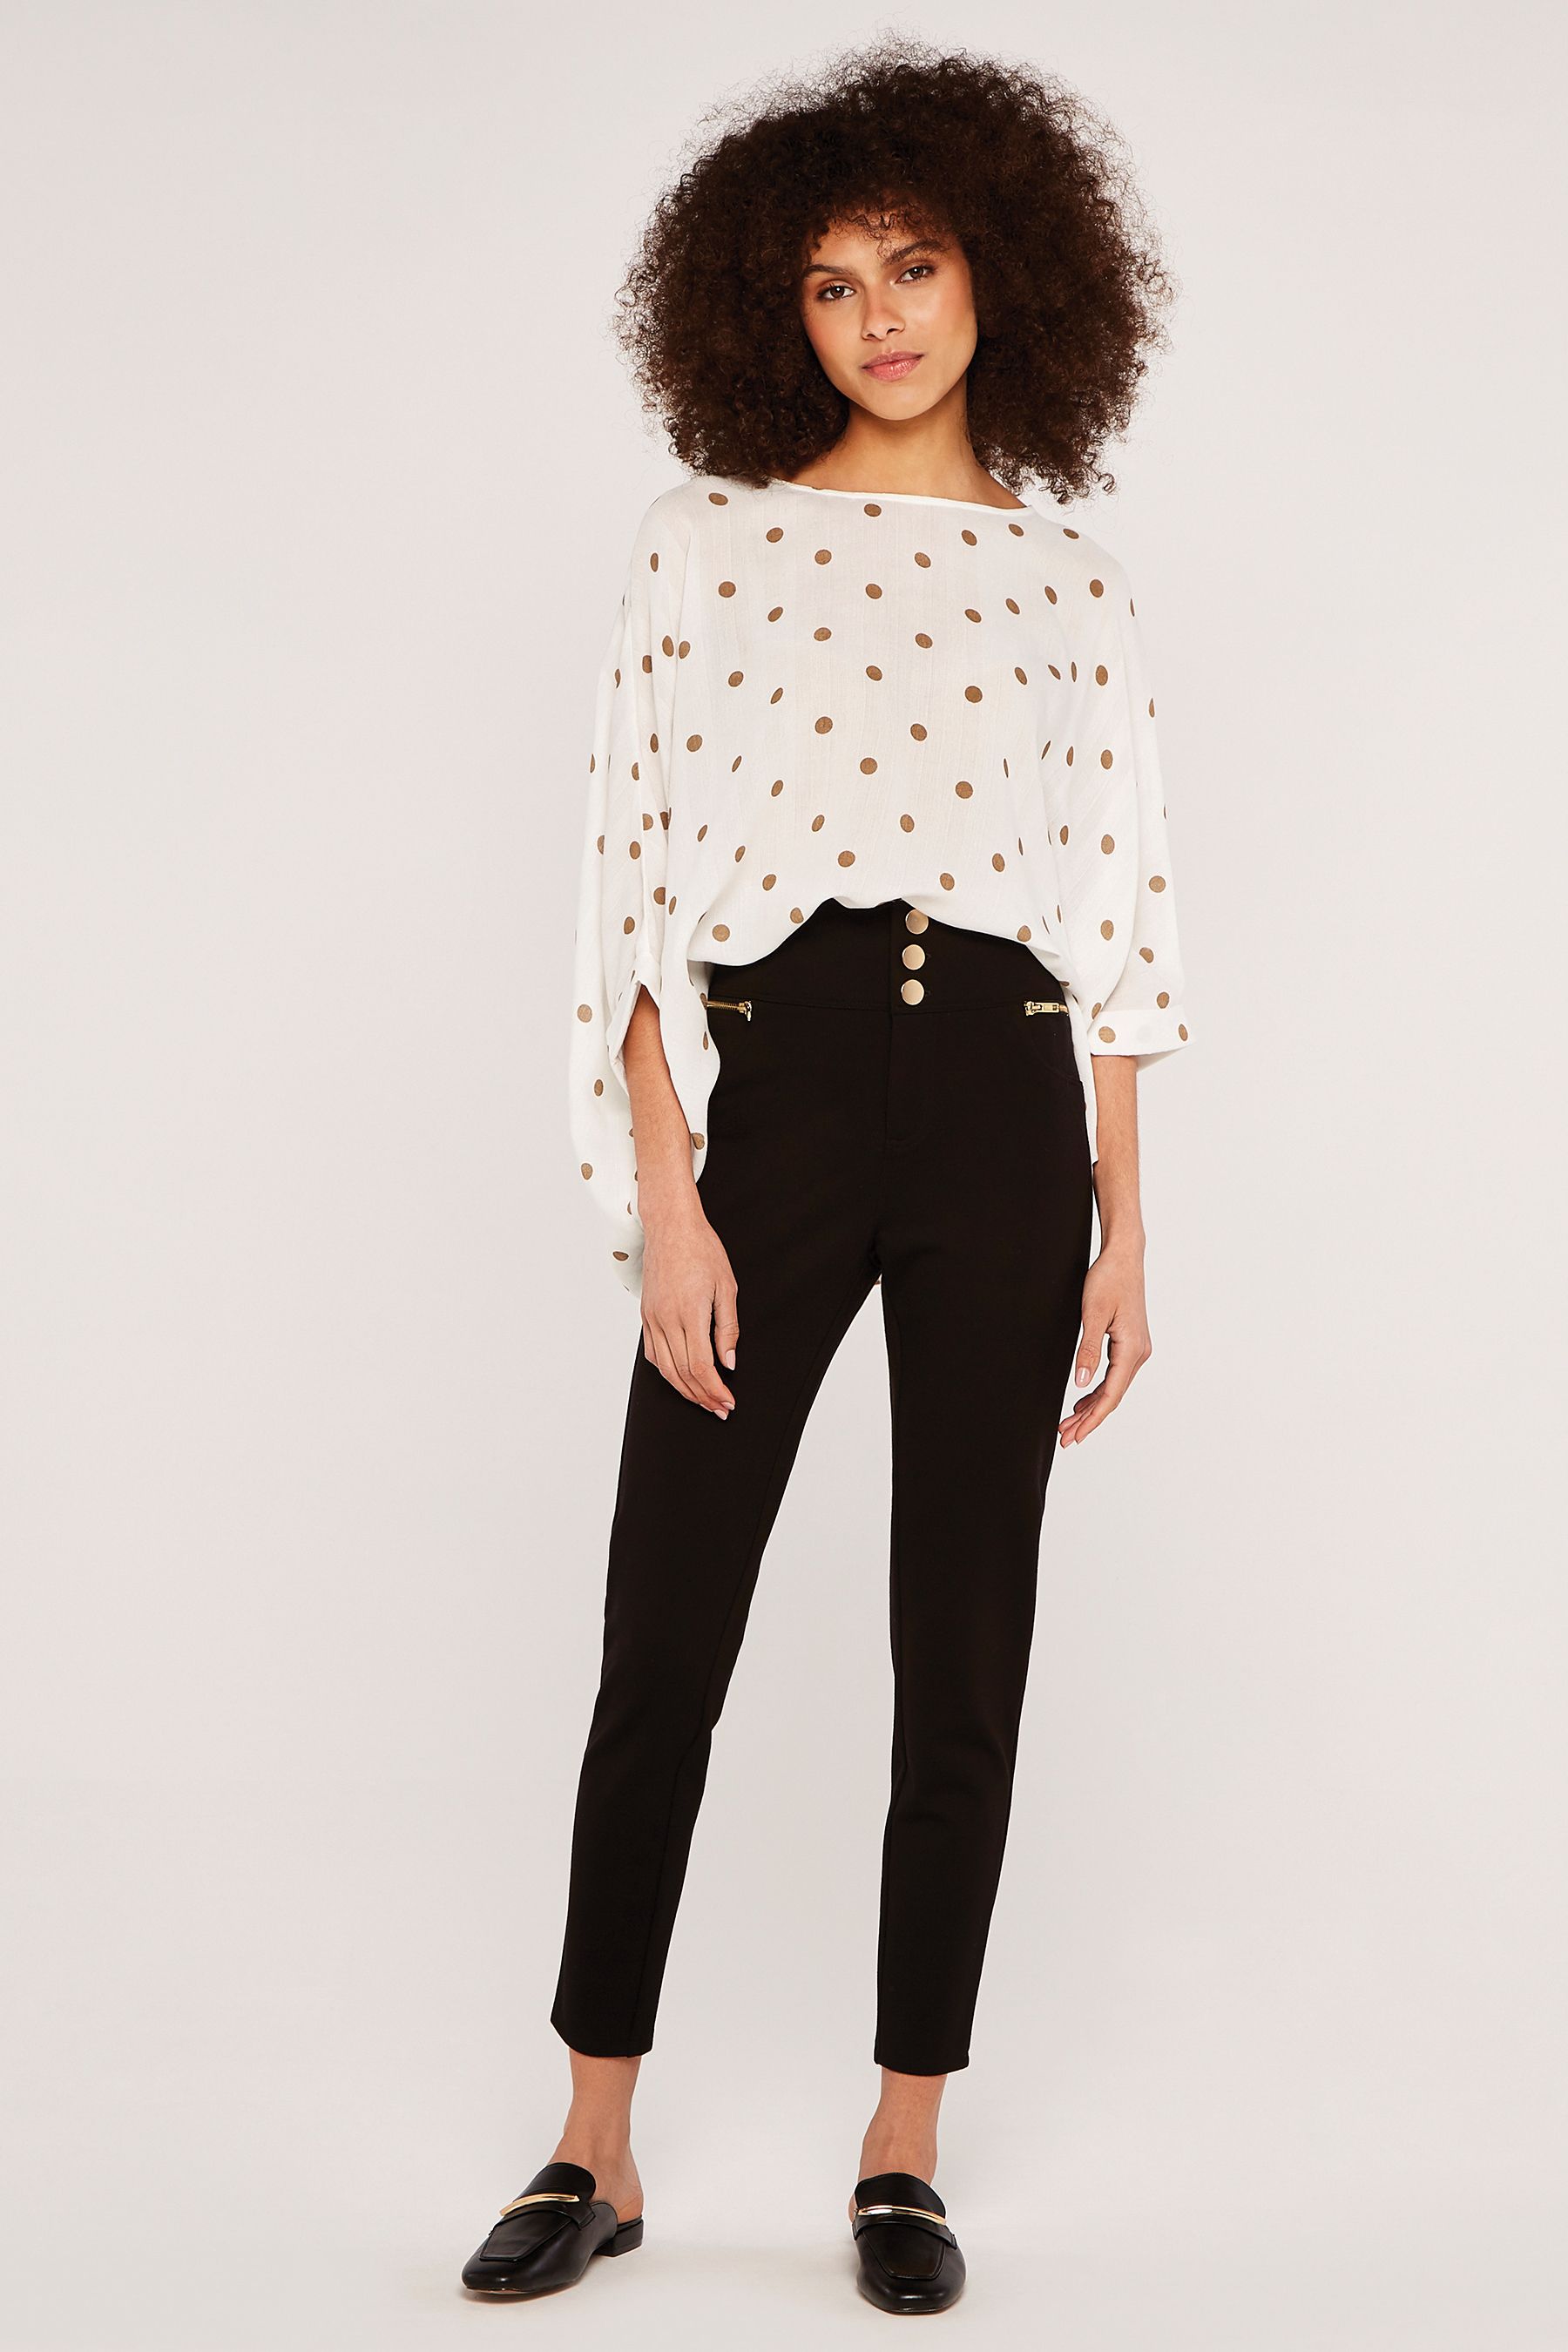 Buy Apricot Black Buttons Ponte Trousers from the Next UK online shop